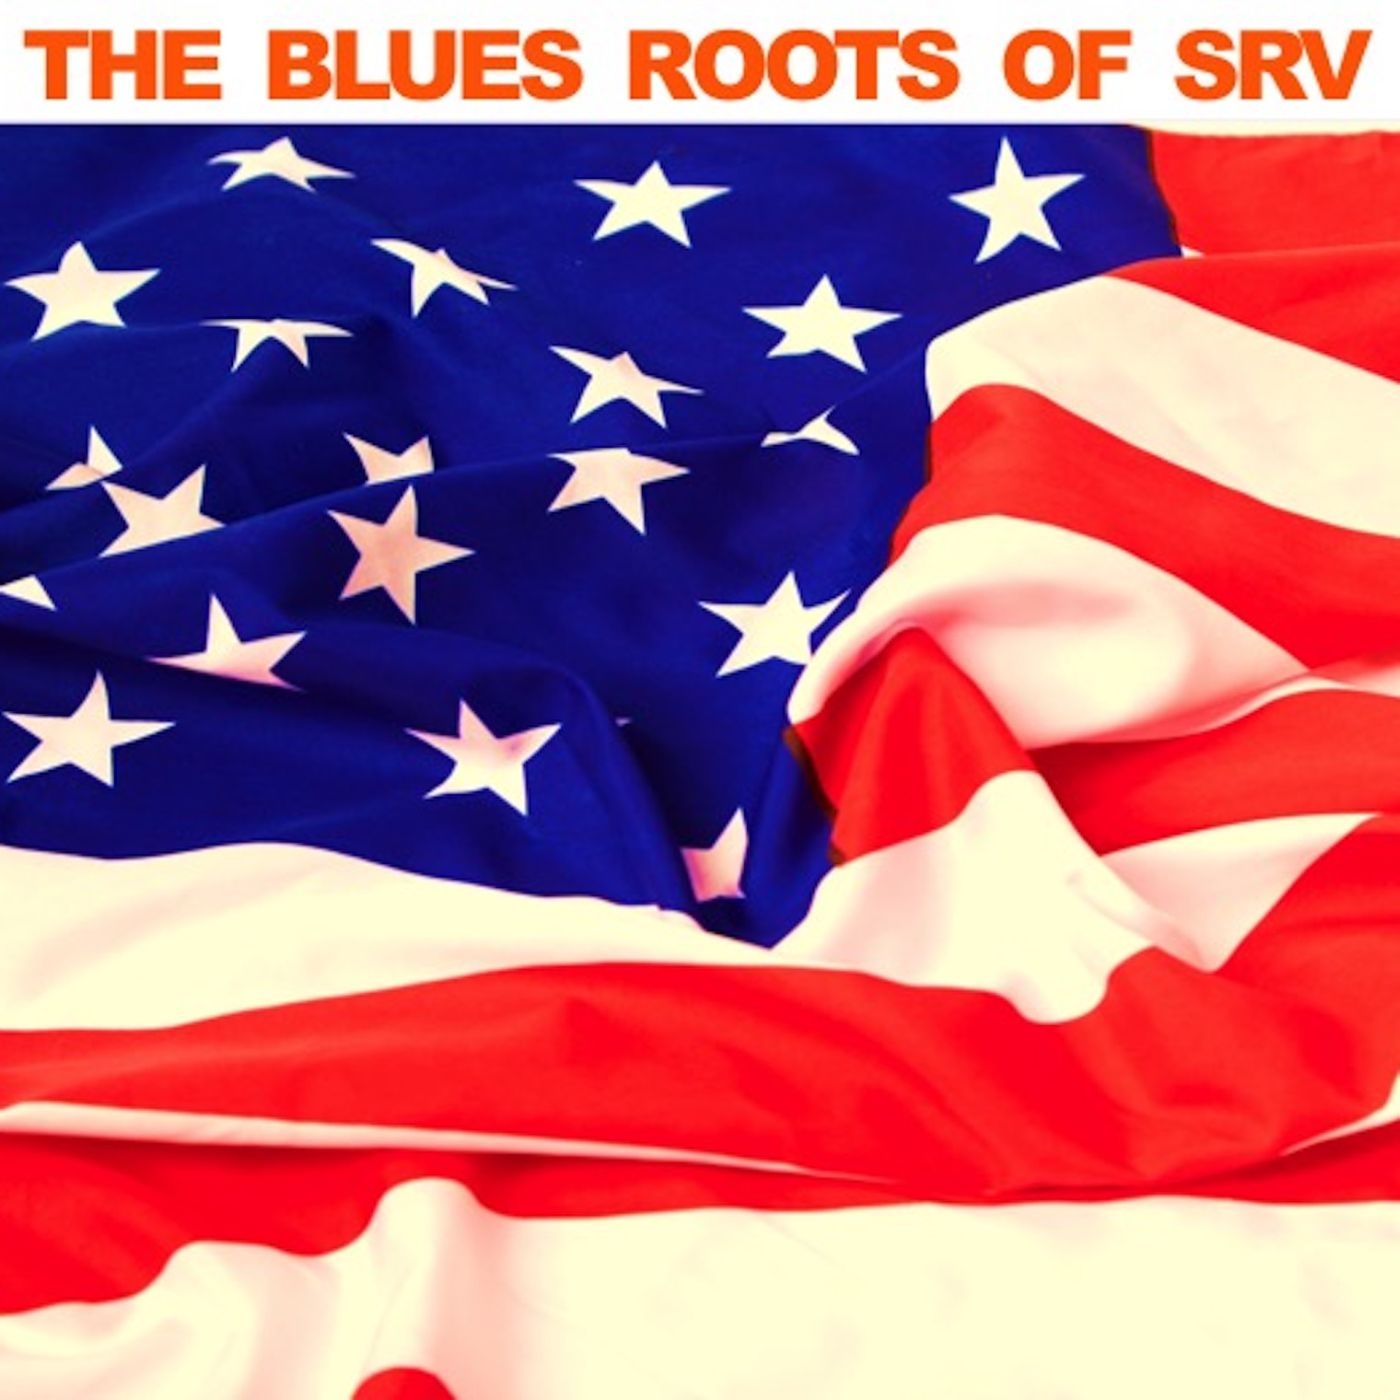 The Blues Roots of SRV